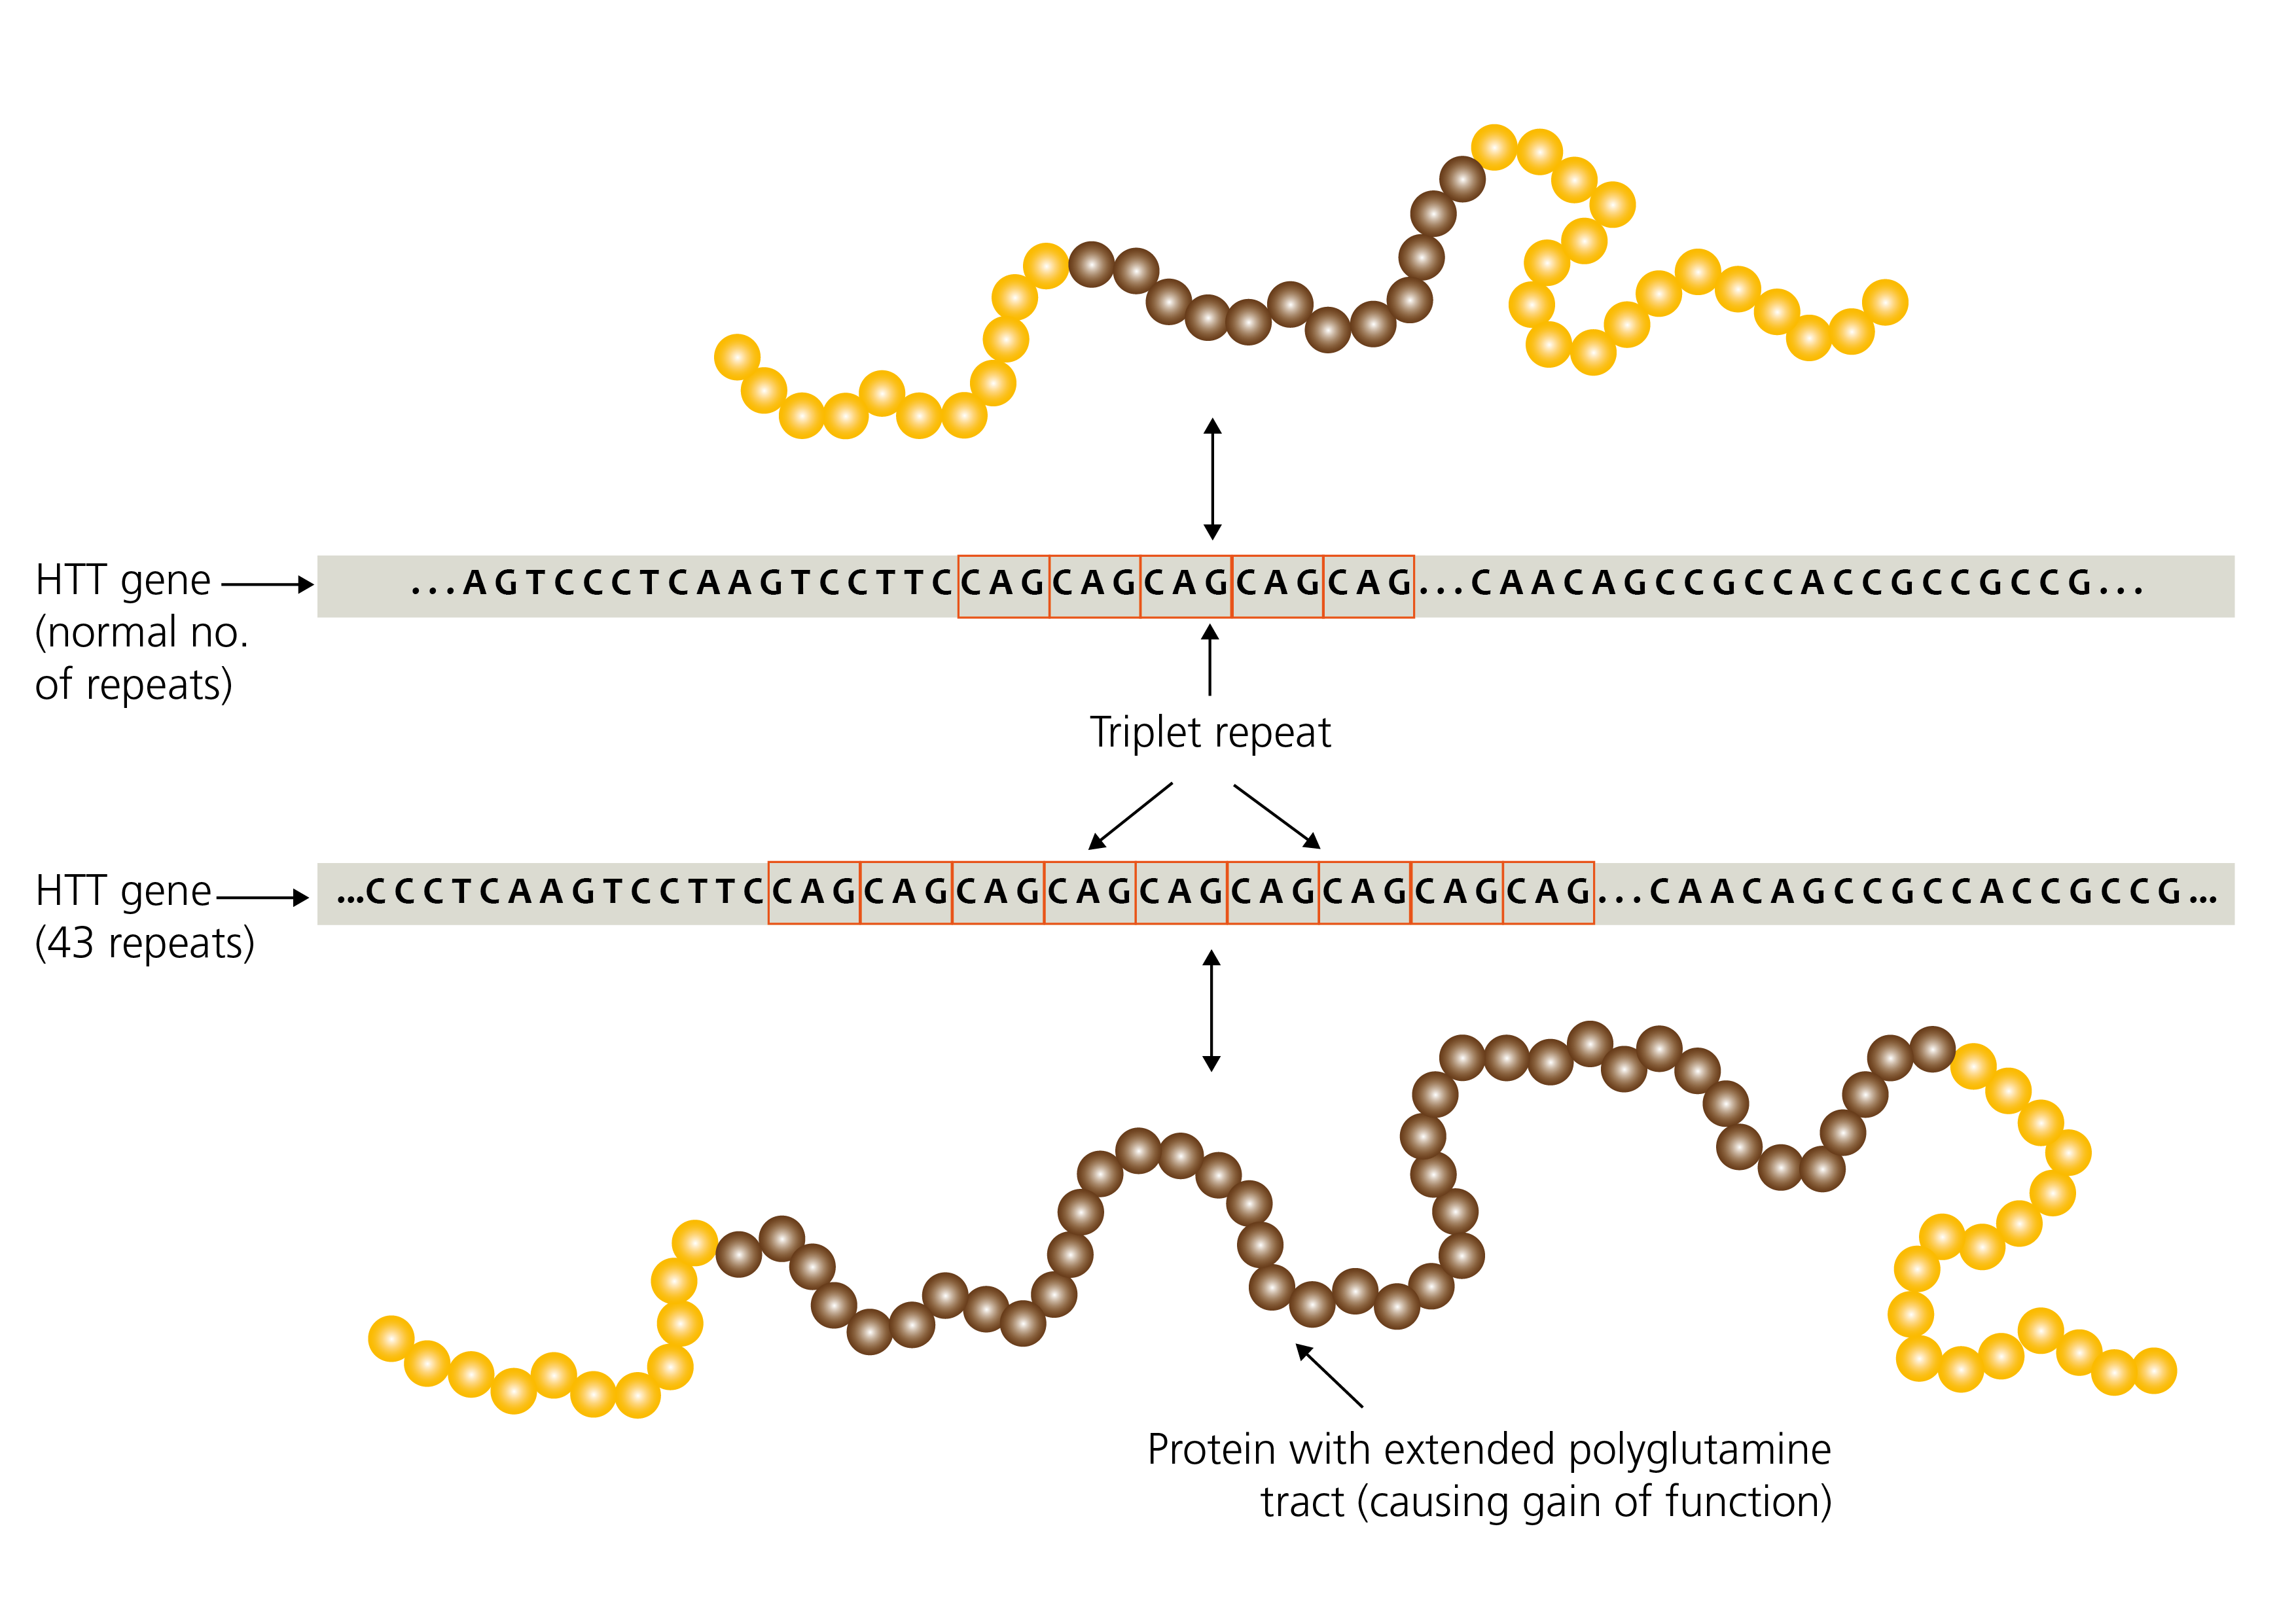 Two images of the HTT gene: one shows an unaffected gene, in which the number of repeats is short, and the other shows a gene affected by Huntingdon disease, in which the number of repeats is much longer.